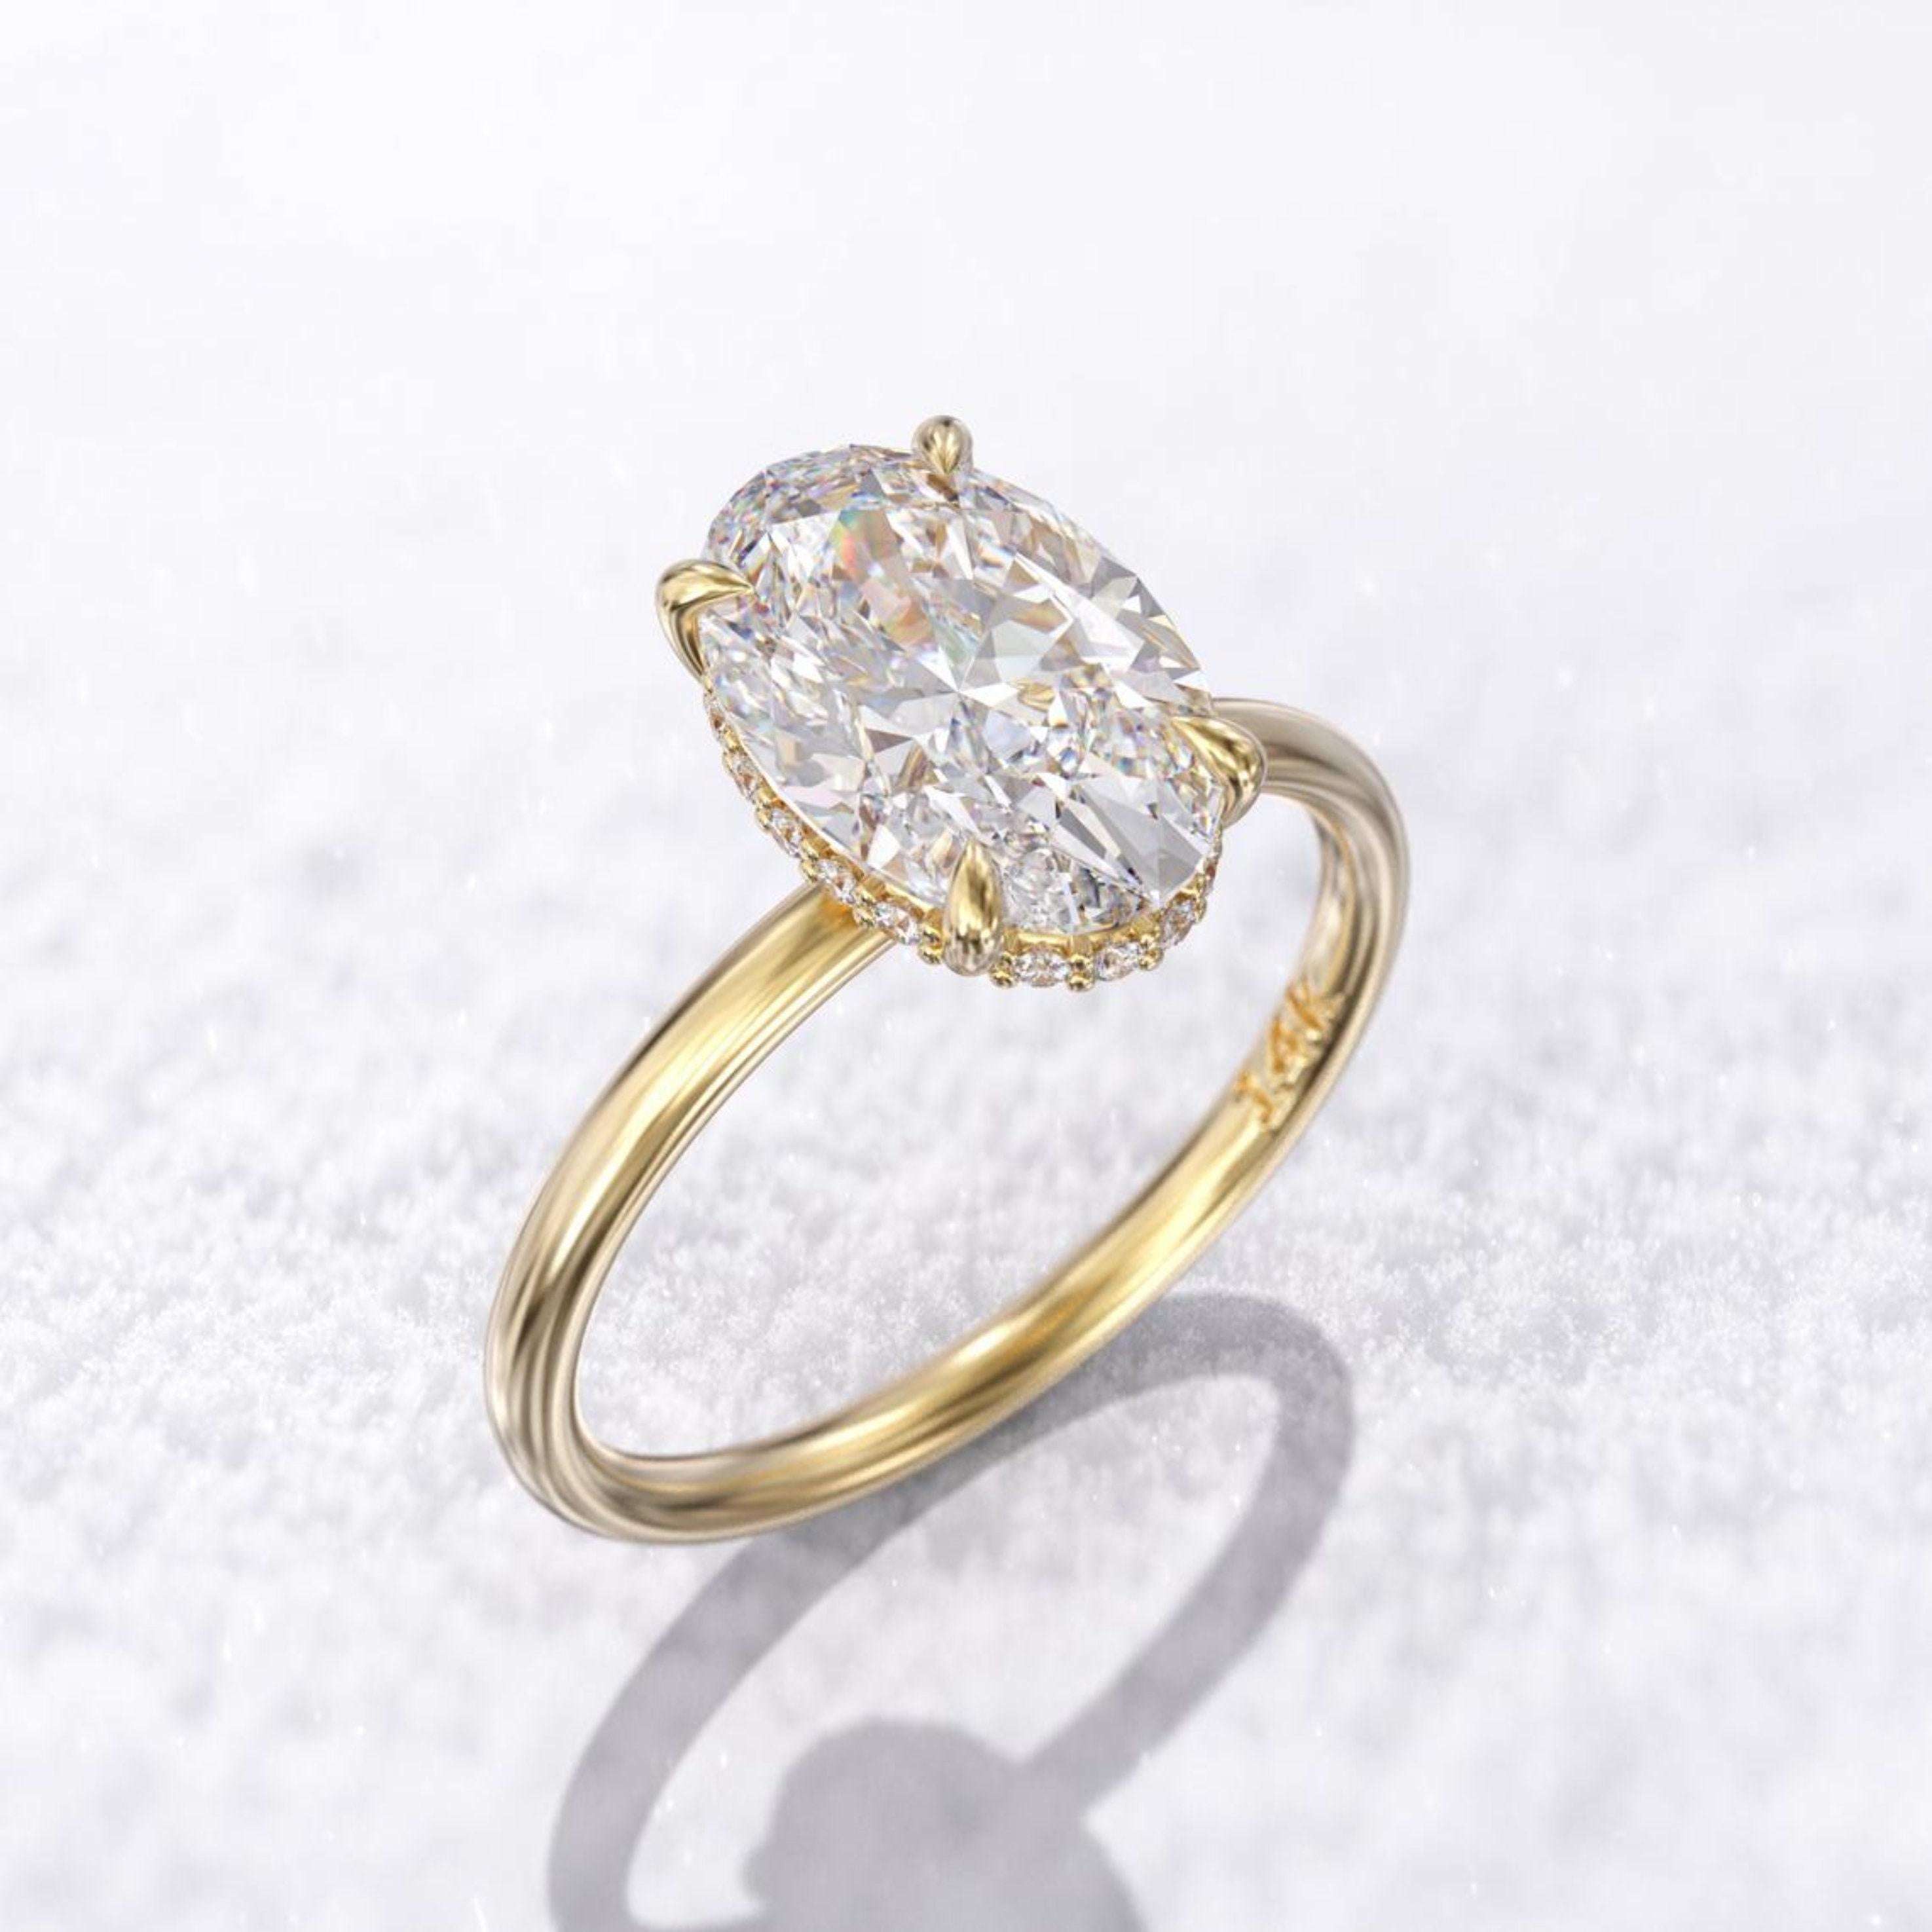 For Sale:  Certified 3 CT Natural Diamond Engagement Ring in 18K Gold, Cocktail Ring 4